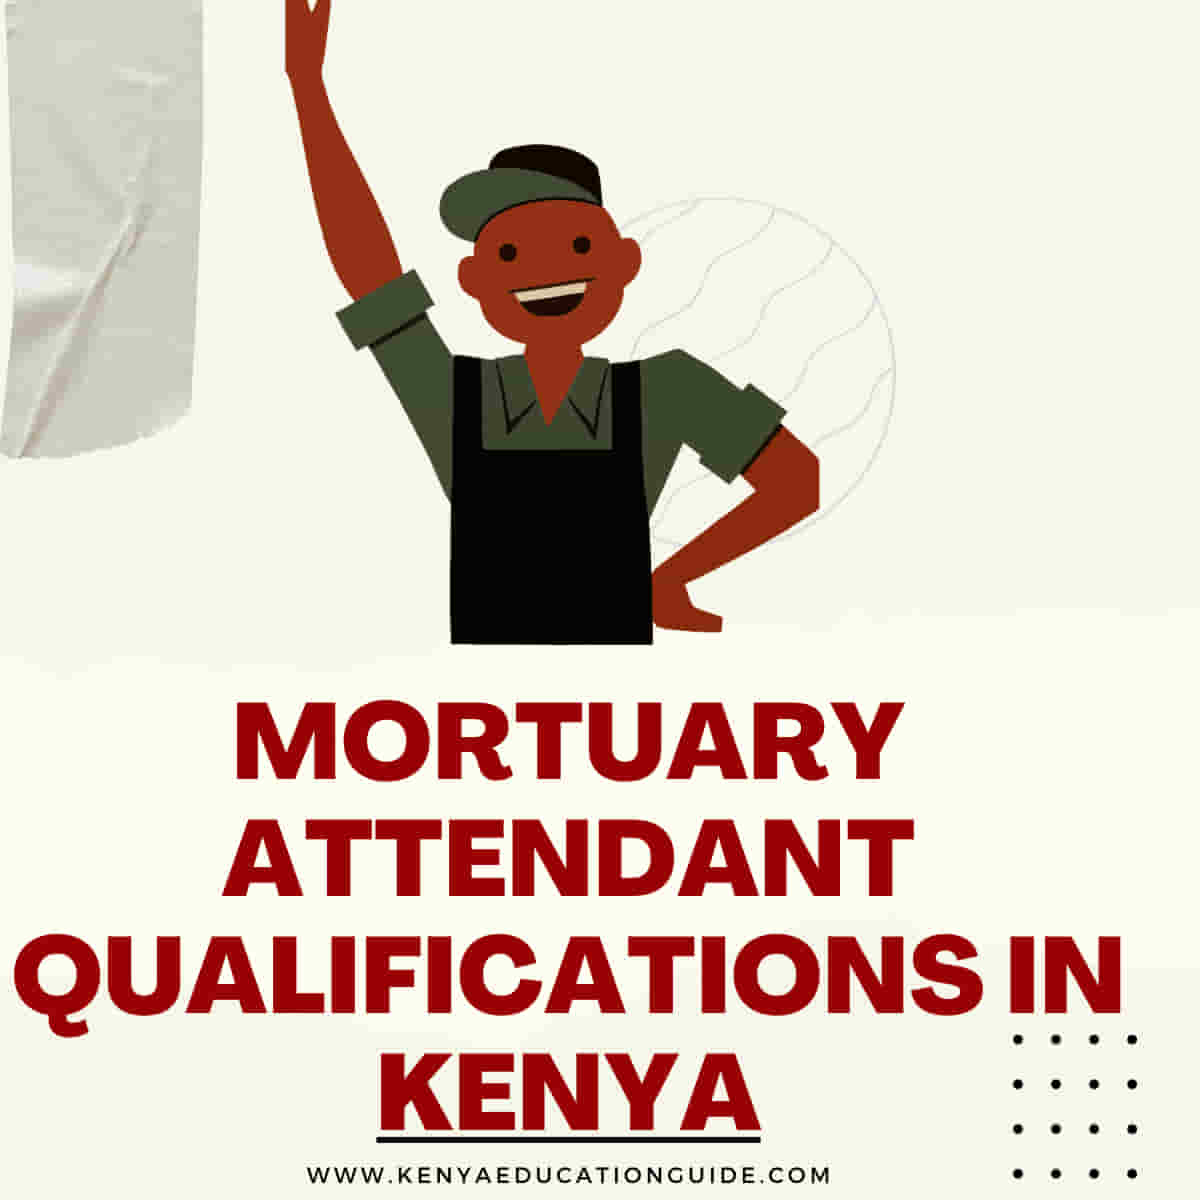 Mortuary attendant qualifications in Kenya